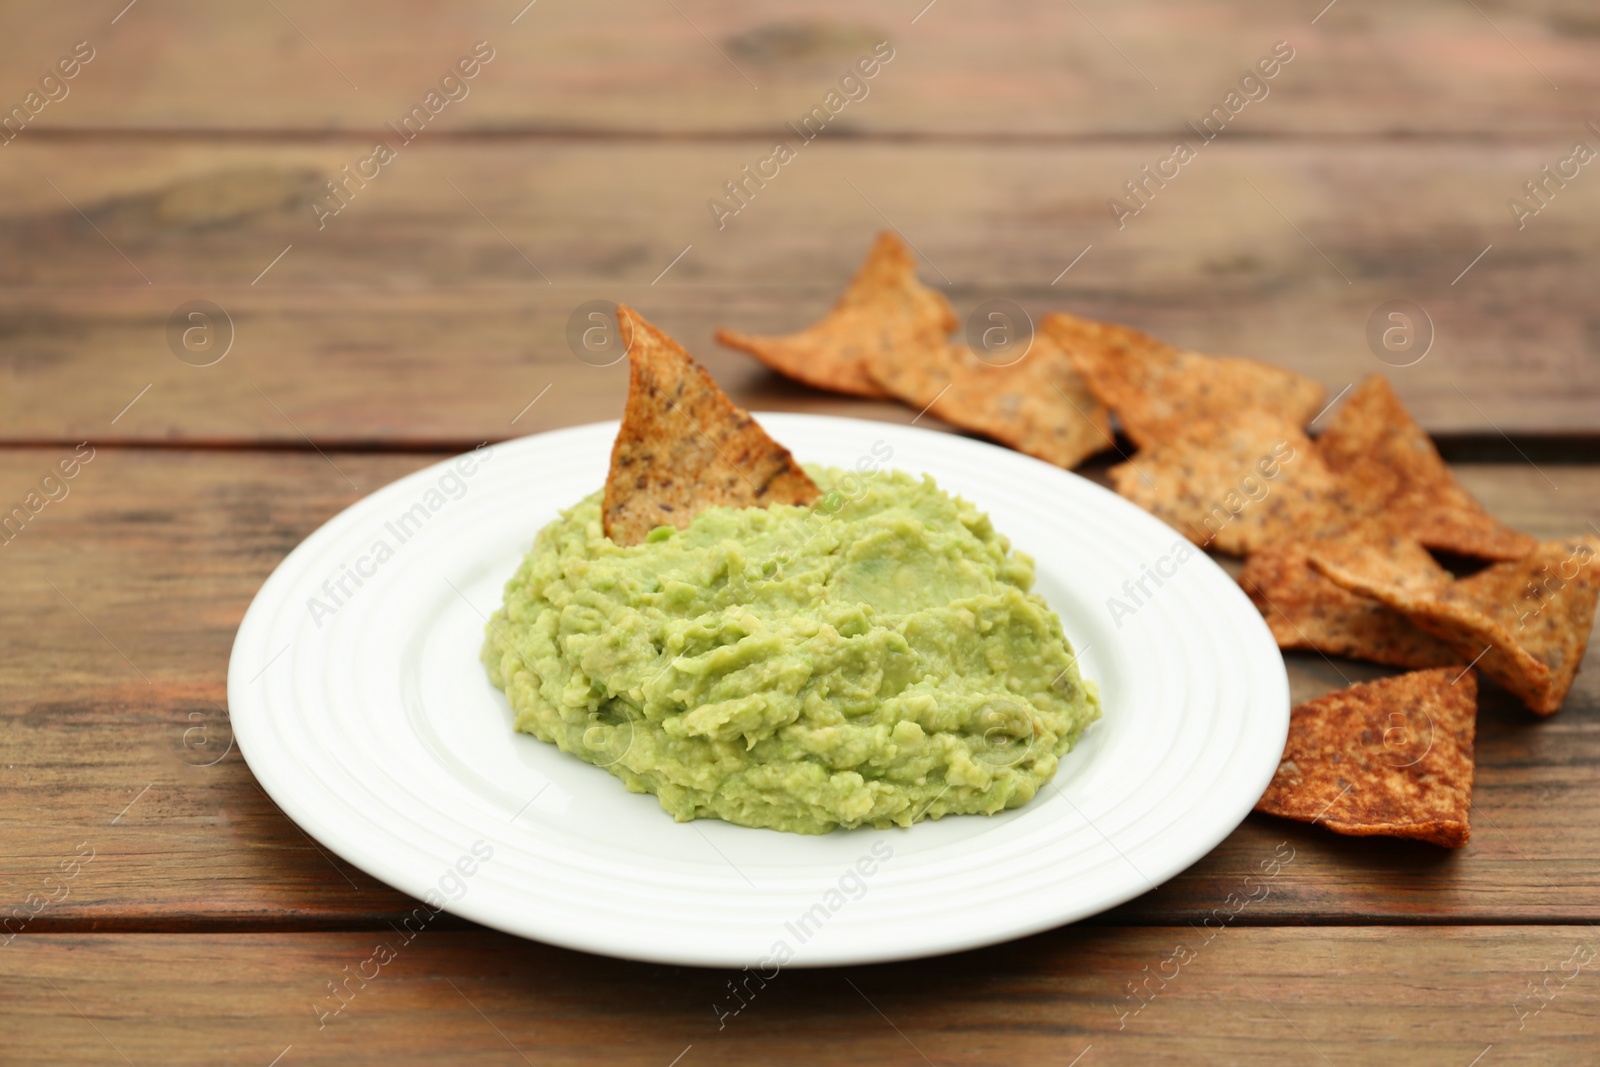 Photo of Delicious guacamole made of avocados and nachos on wooden table